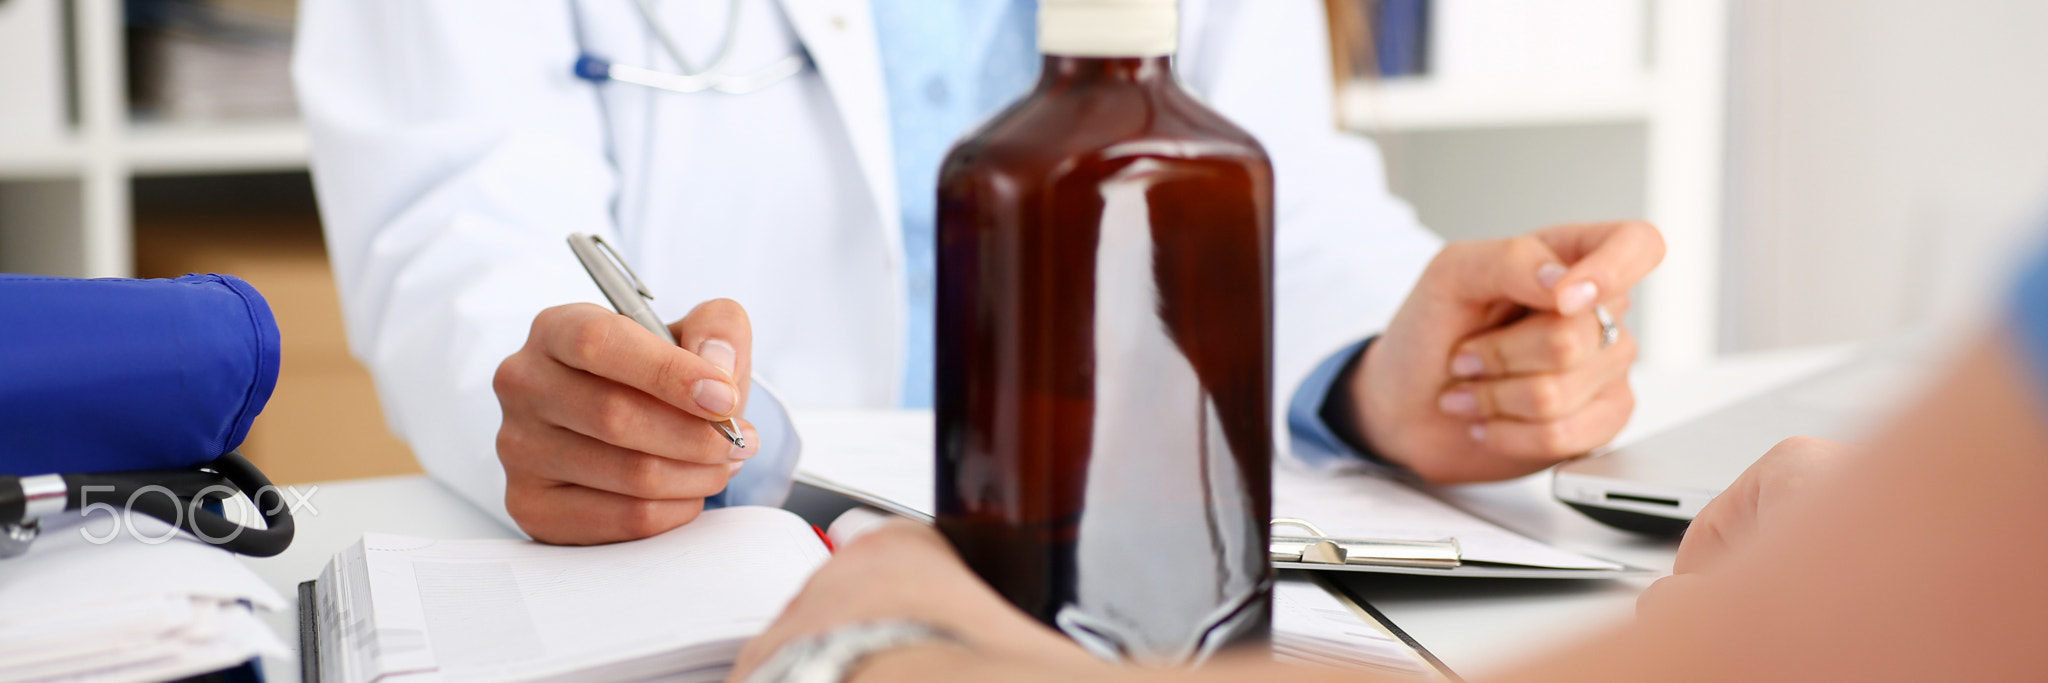 Alcoholic hold in arm empty bottle at doctor reception